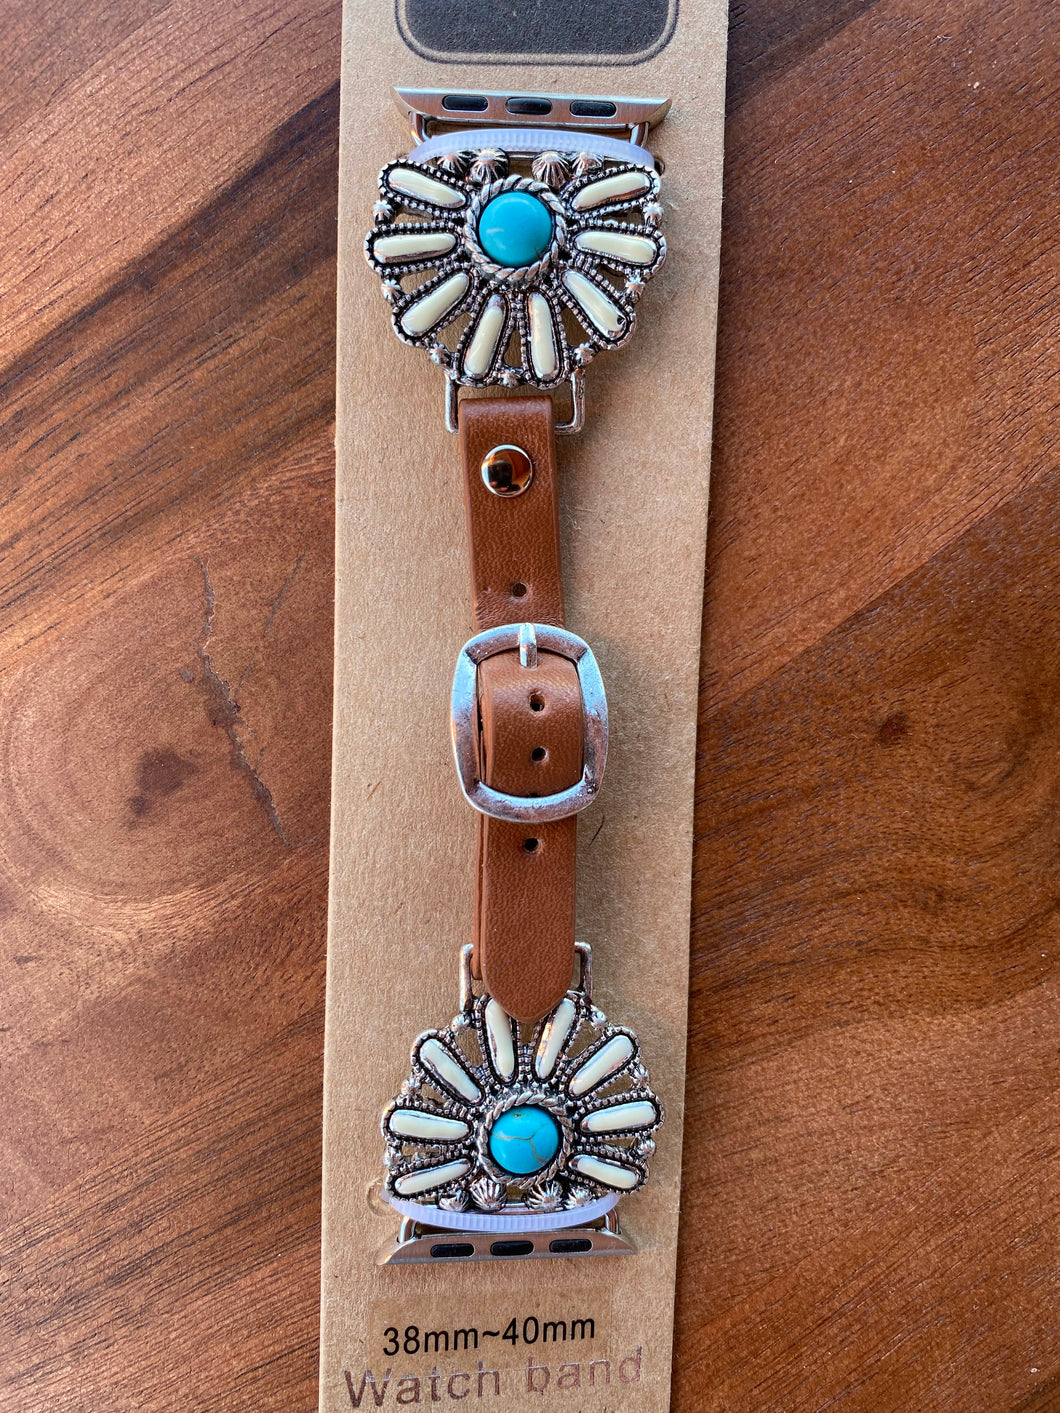 Western Watch Band White With Turquoise Blossom